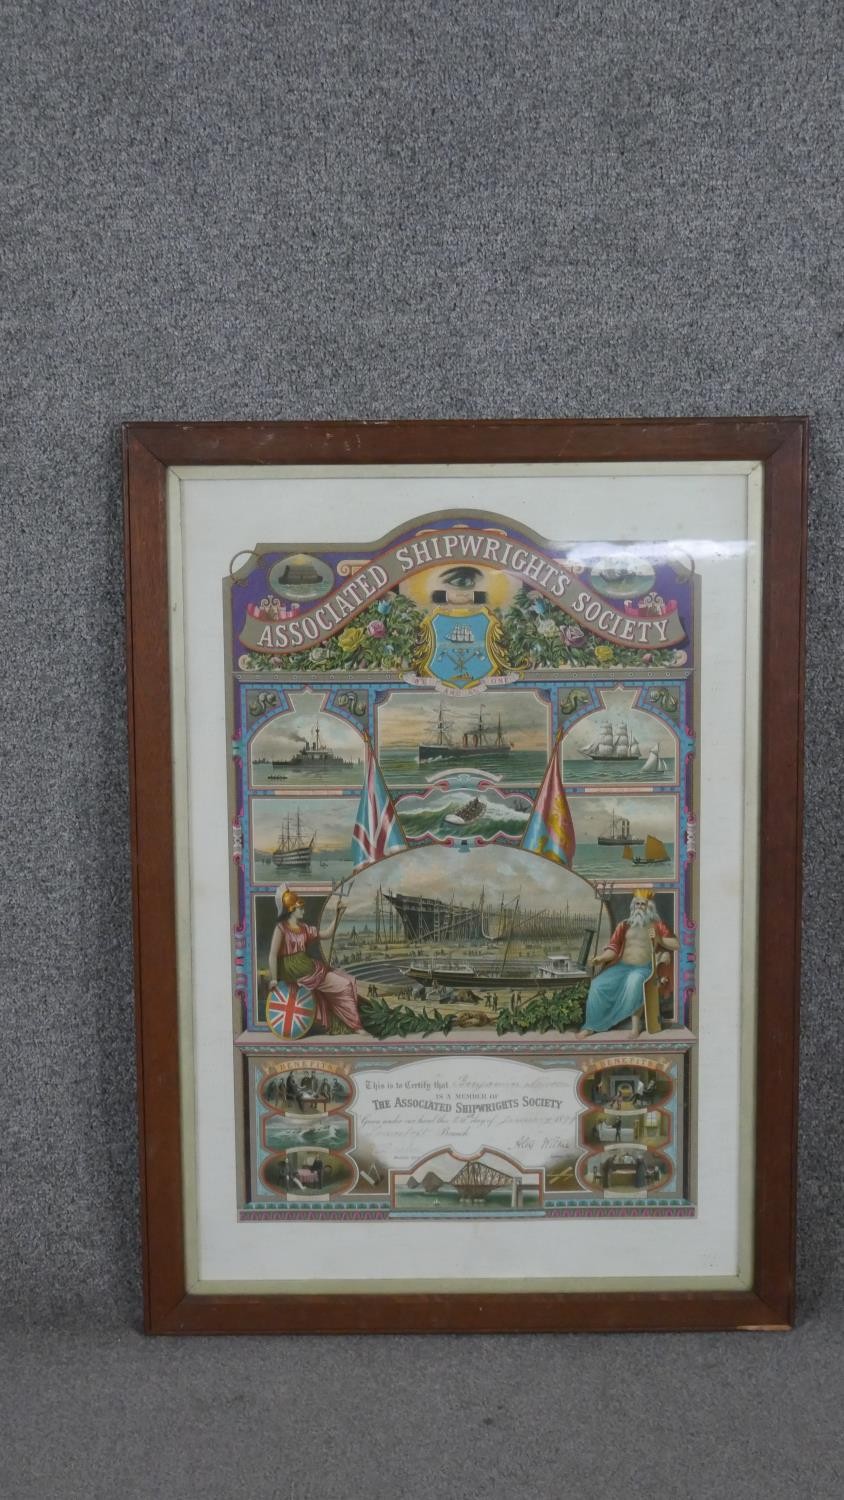 A late Victorian Associated Shipwrights Society certificate, awarded to Benjamin Newson by the - Image 2 of 7